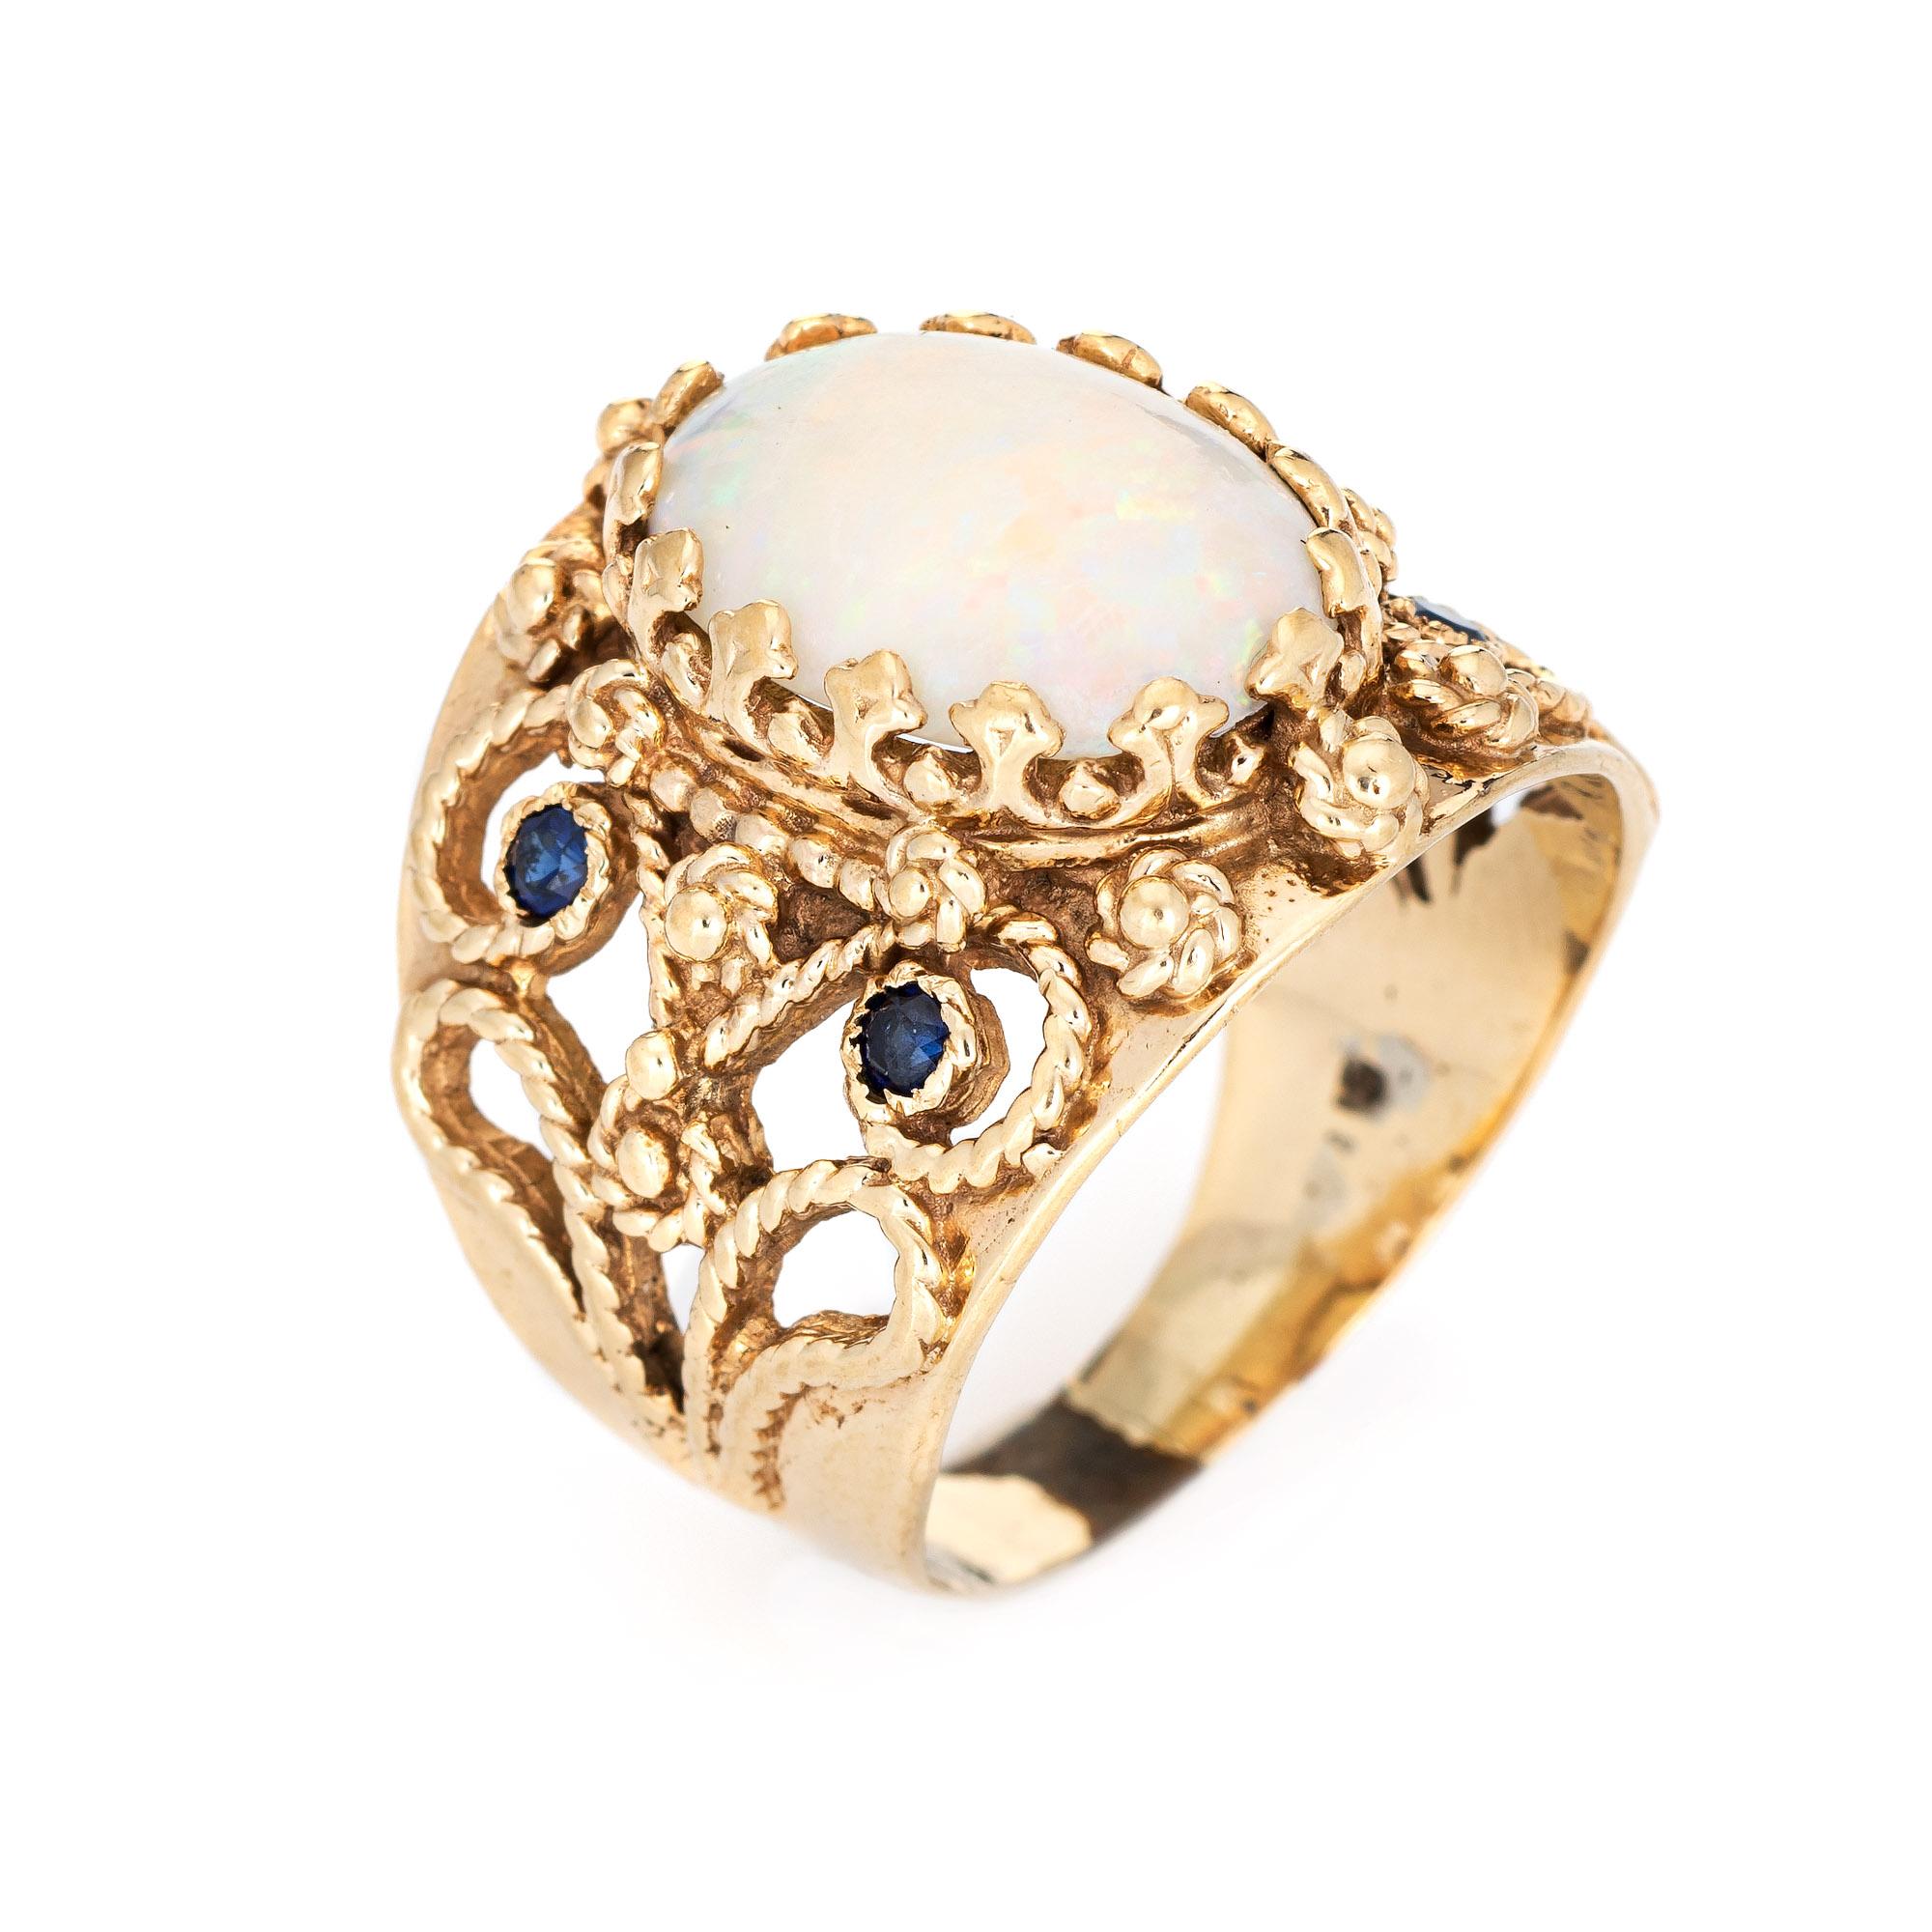 Stylish vintage opal & sapphire ring (circa 1960s to 1970s) crafted in 14 karat yellow gold. 

Natural opal measures 14mm x 10mm (estimated at 2.25 carats). The opal is in very good condition and free of cracks or chips. Four sapphires total an